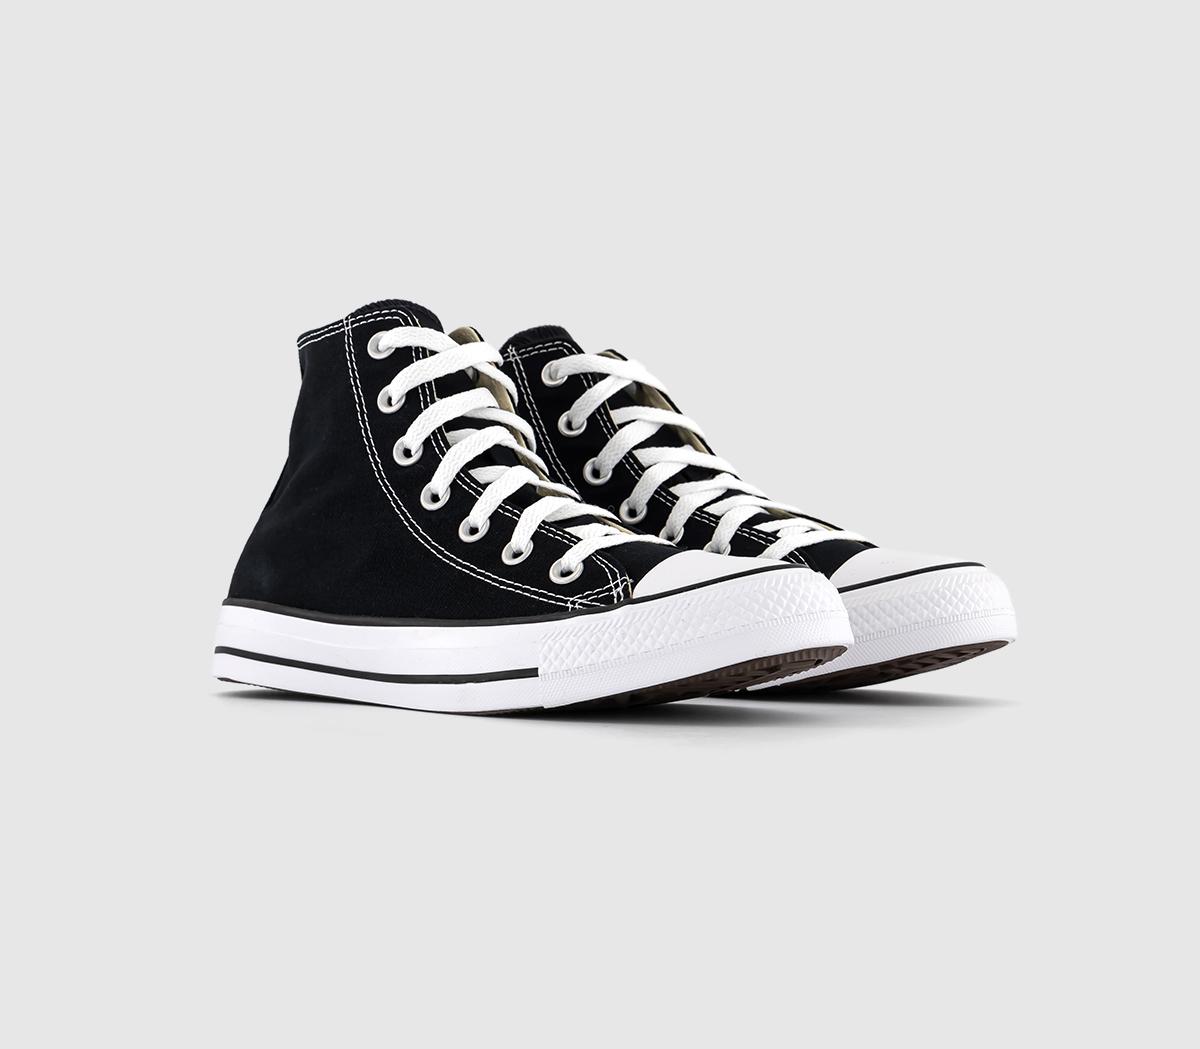 Converse Black And White All Star High Canvas Plain Classic Trainers, 9